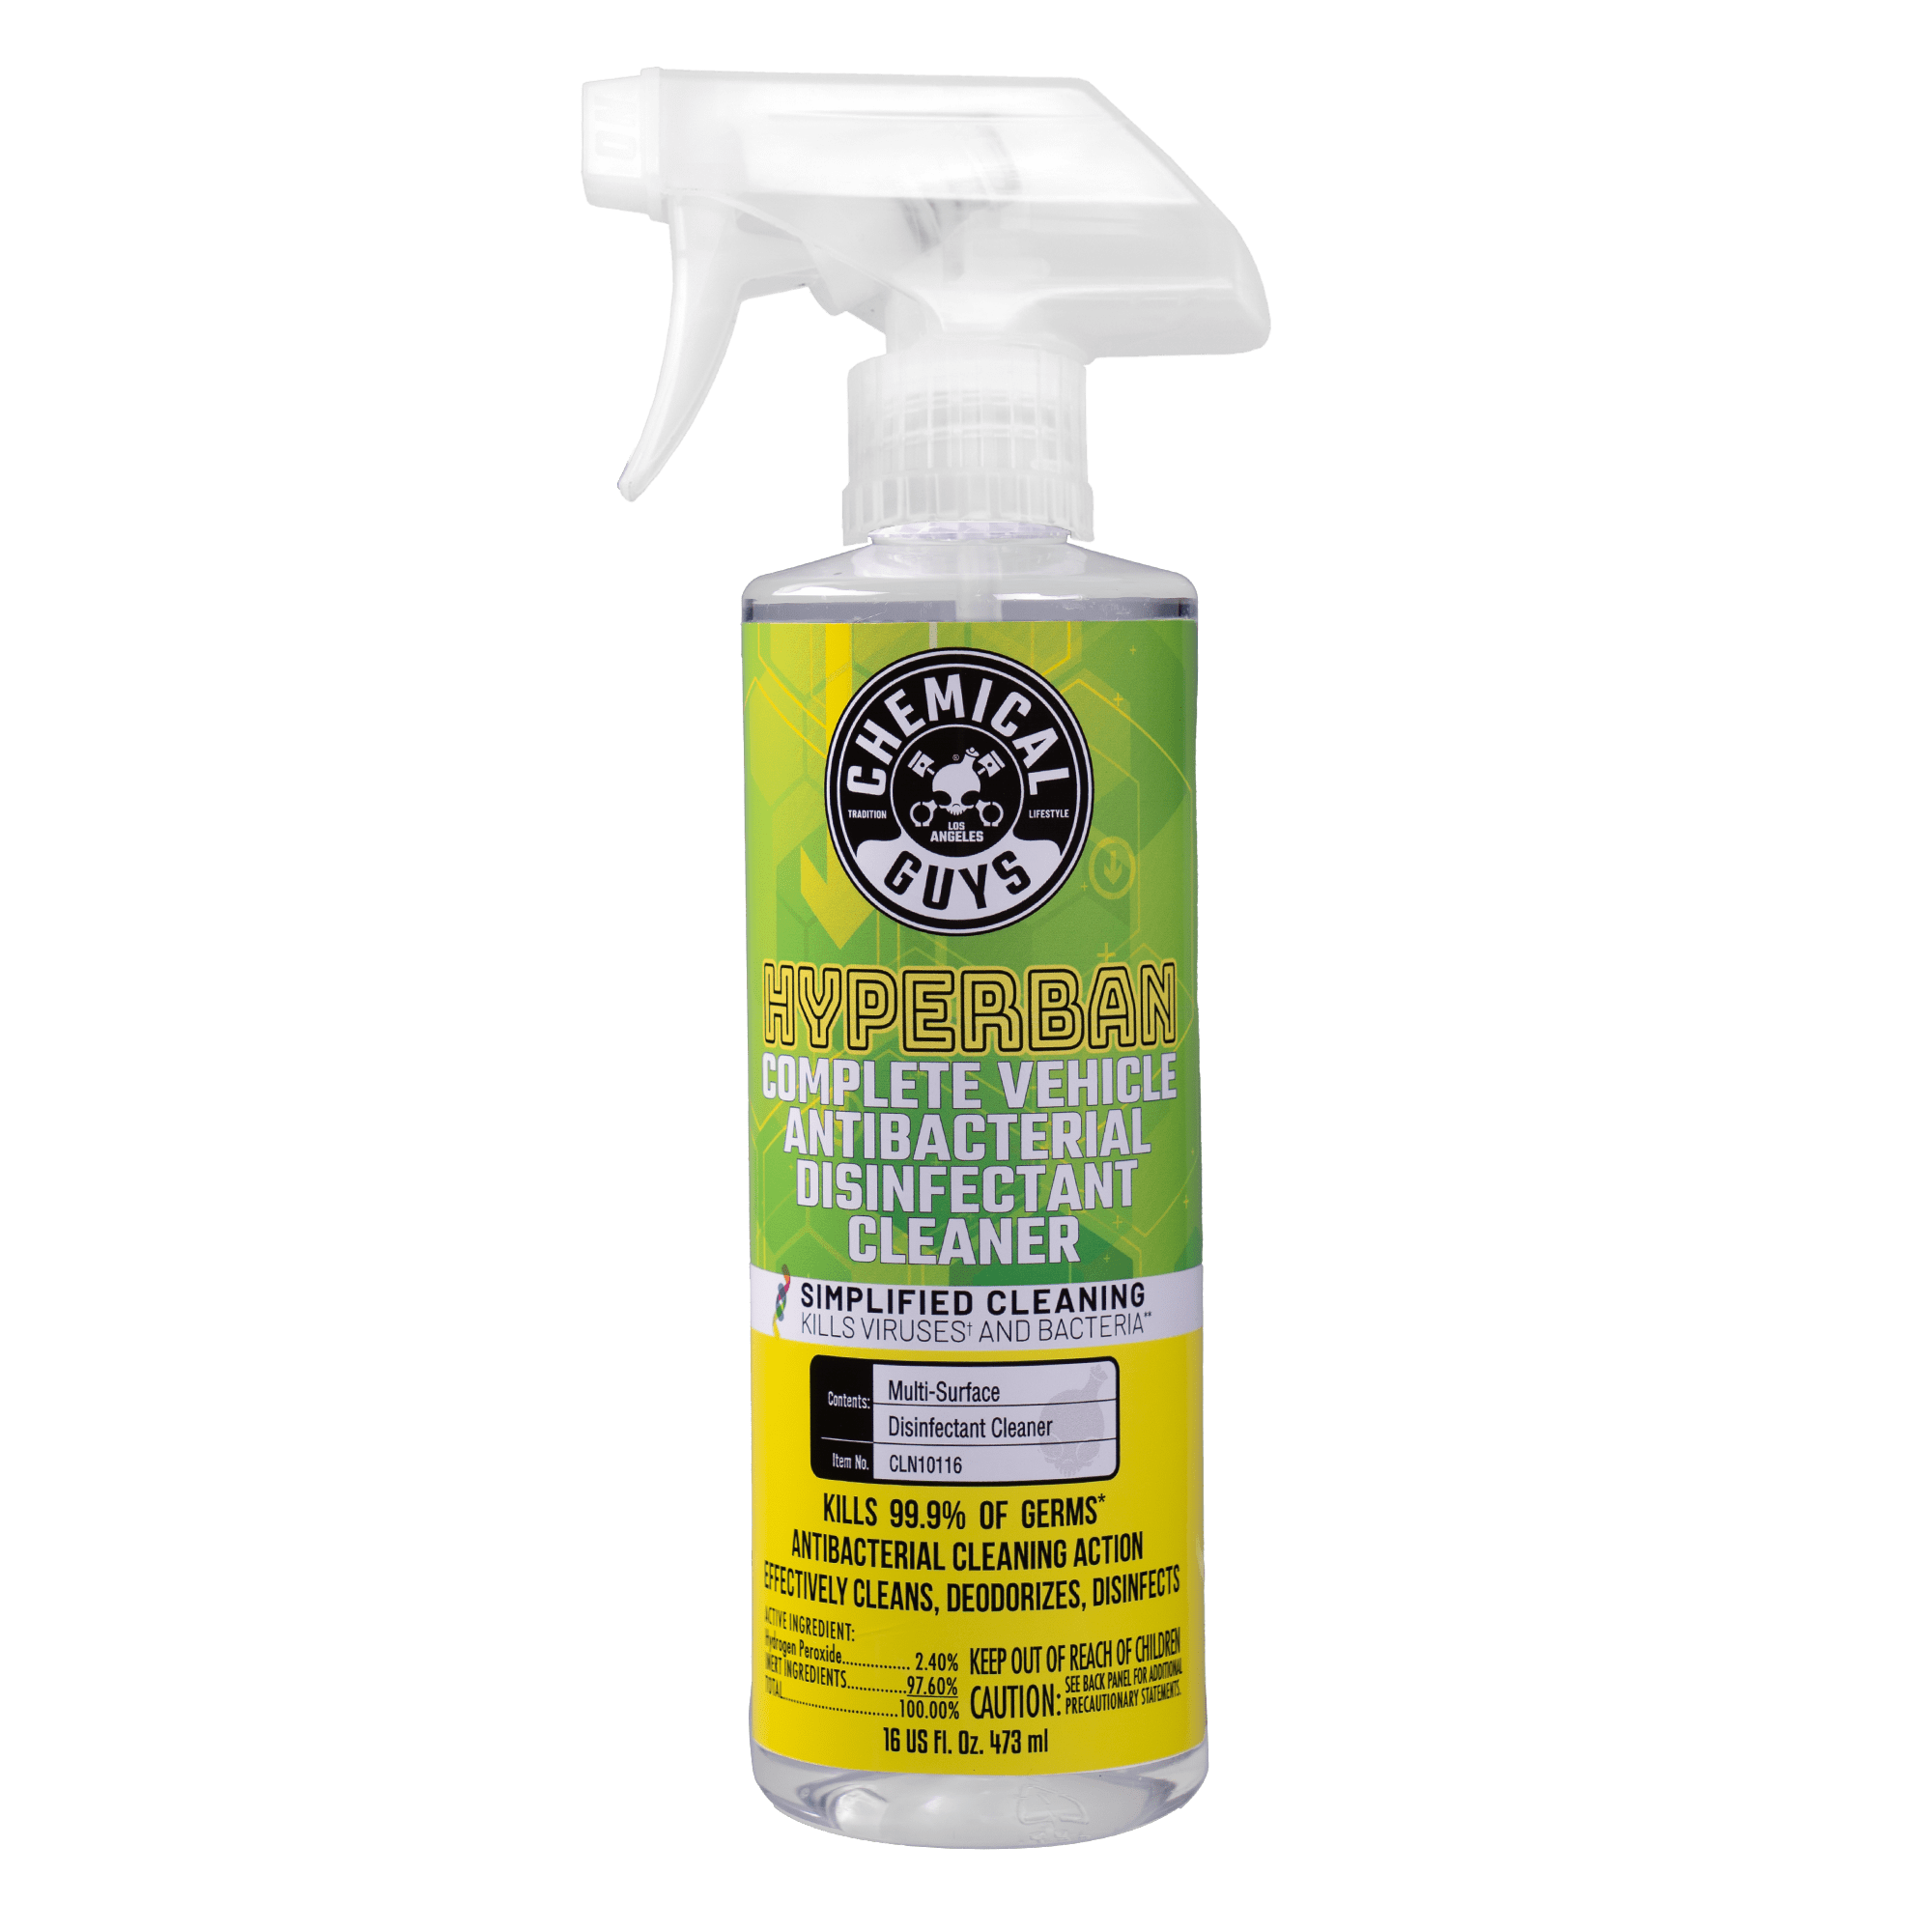 Chemical Guys HyperBan Complete Vehicle AB Disinfectant Cleaner - 16 oz.